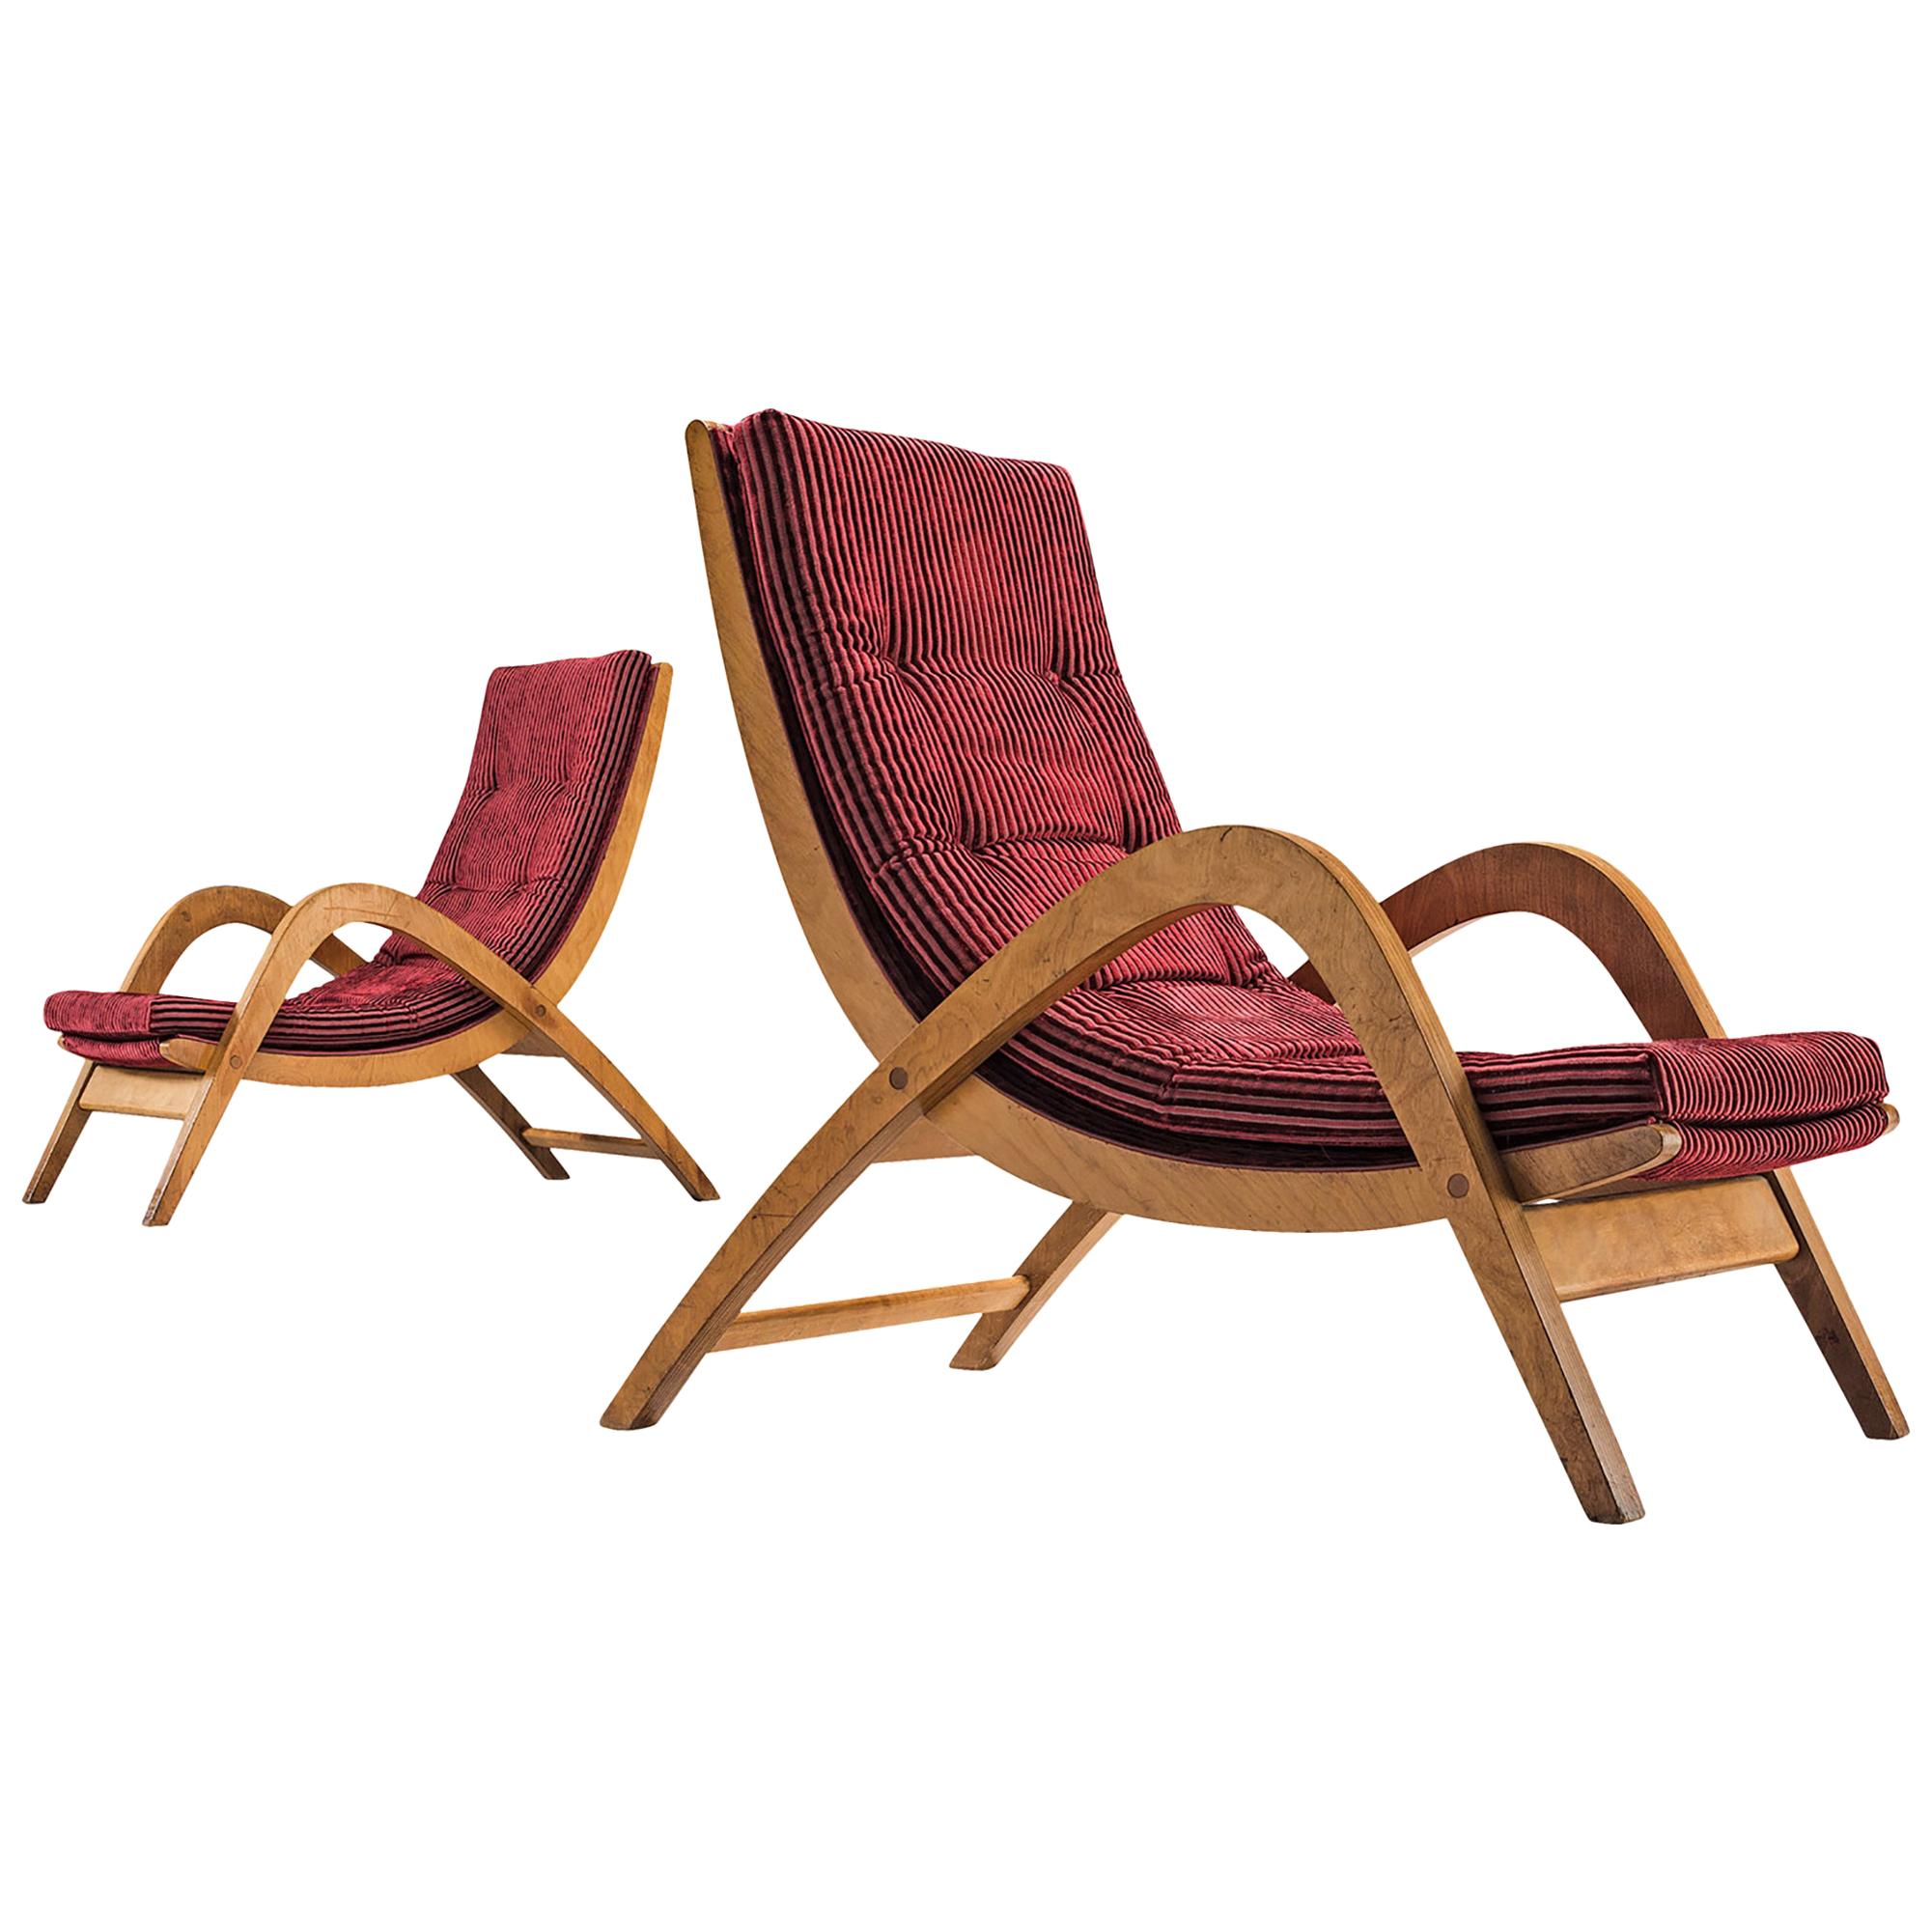 Very Rare Large Lounge Chairs by Neil Morris